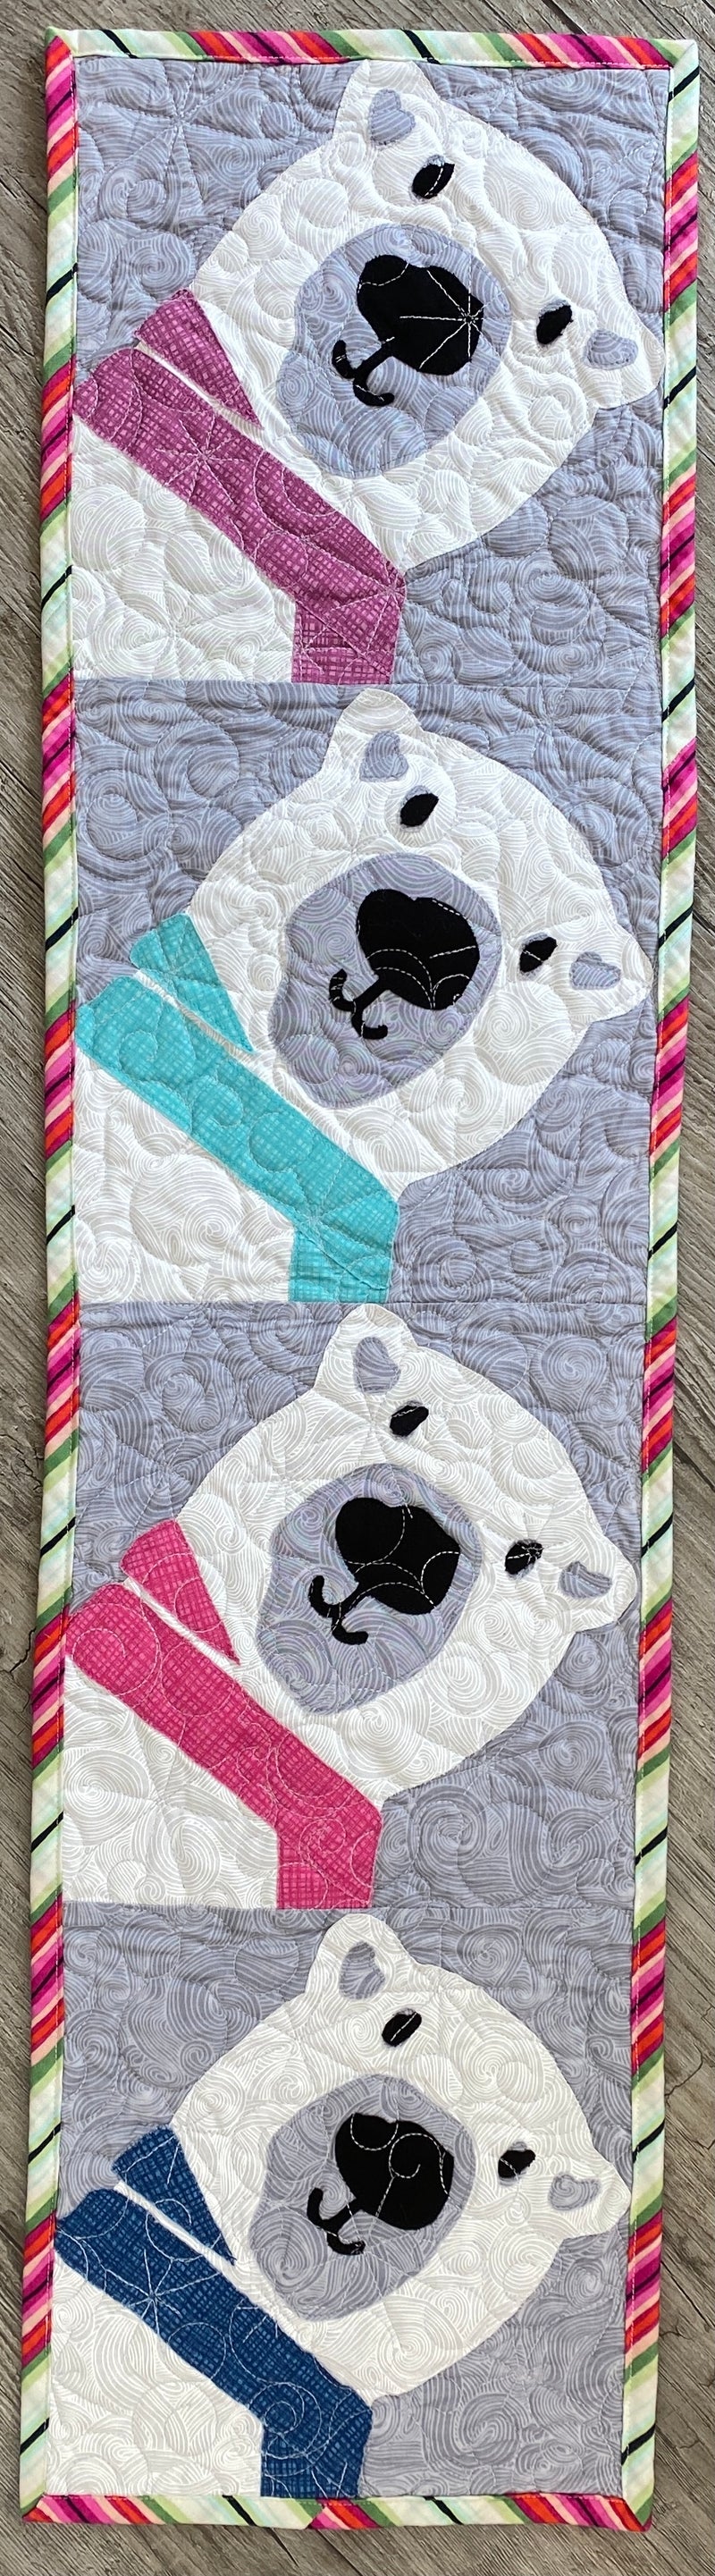 2021 Digital Download Pattern Only: Cotton the Polar Bear, Quilters Trek / Row by Row Experience